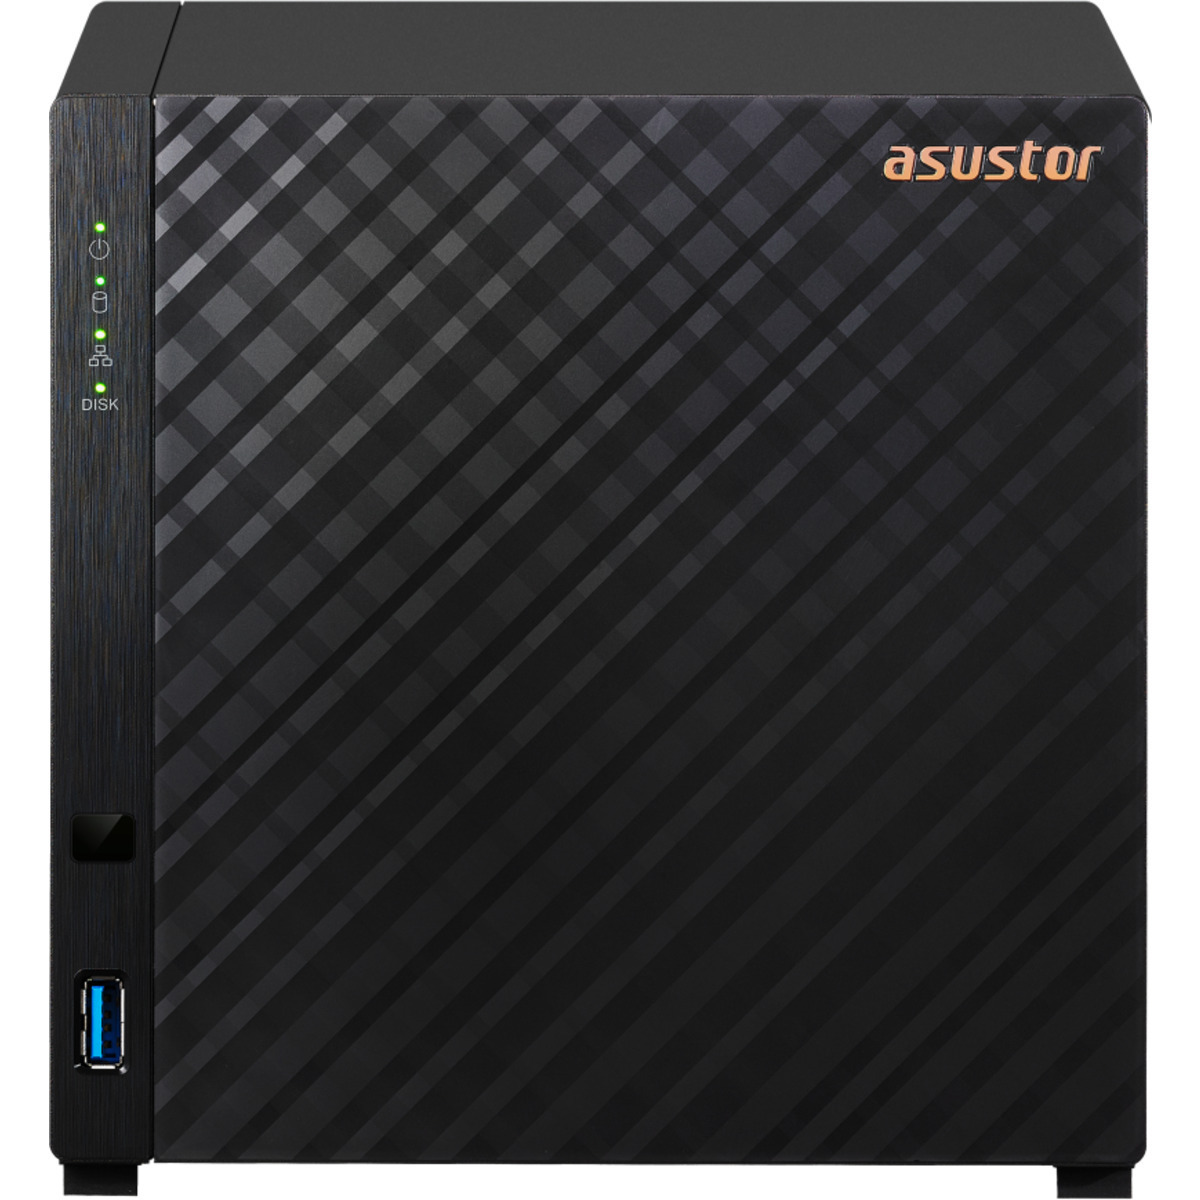 ASUSTOR DRIVESTOR 4 AS1104T 18tb 4-Bay Desktop Personal / Basic Home / Small Office NAS - Network Attached Storage Device 3x6tb Seagate IronWolf Pro ST6000NT001 3.5 7200rpm SATA 6Gb/s HDD NAS Class Drives Installed - Burn-In Tested DRIVESTOR 4 AS1104T